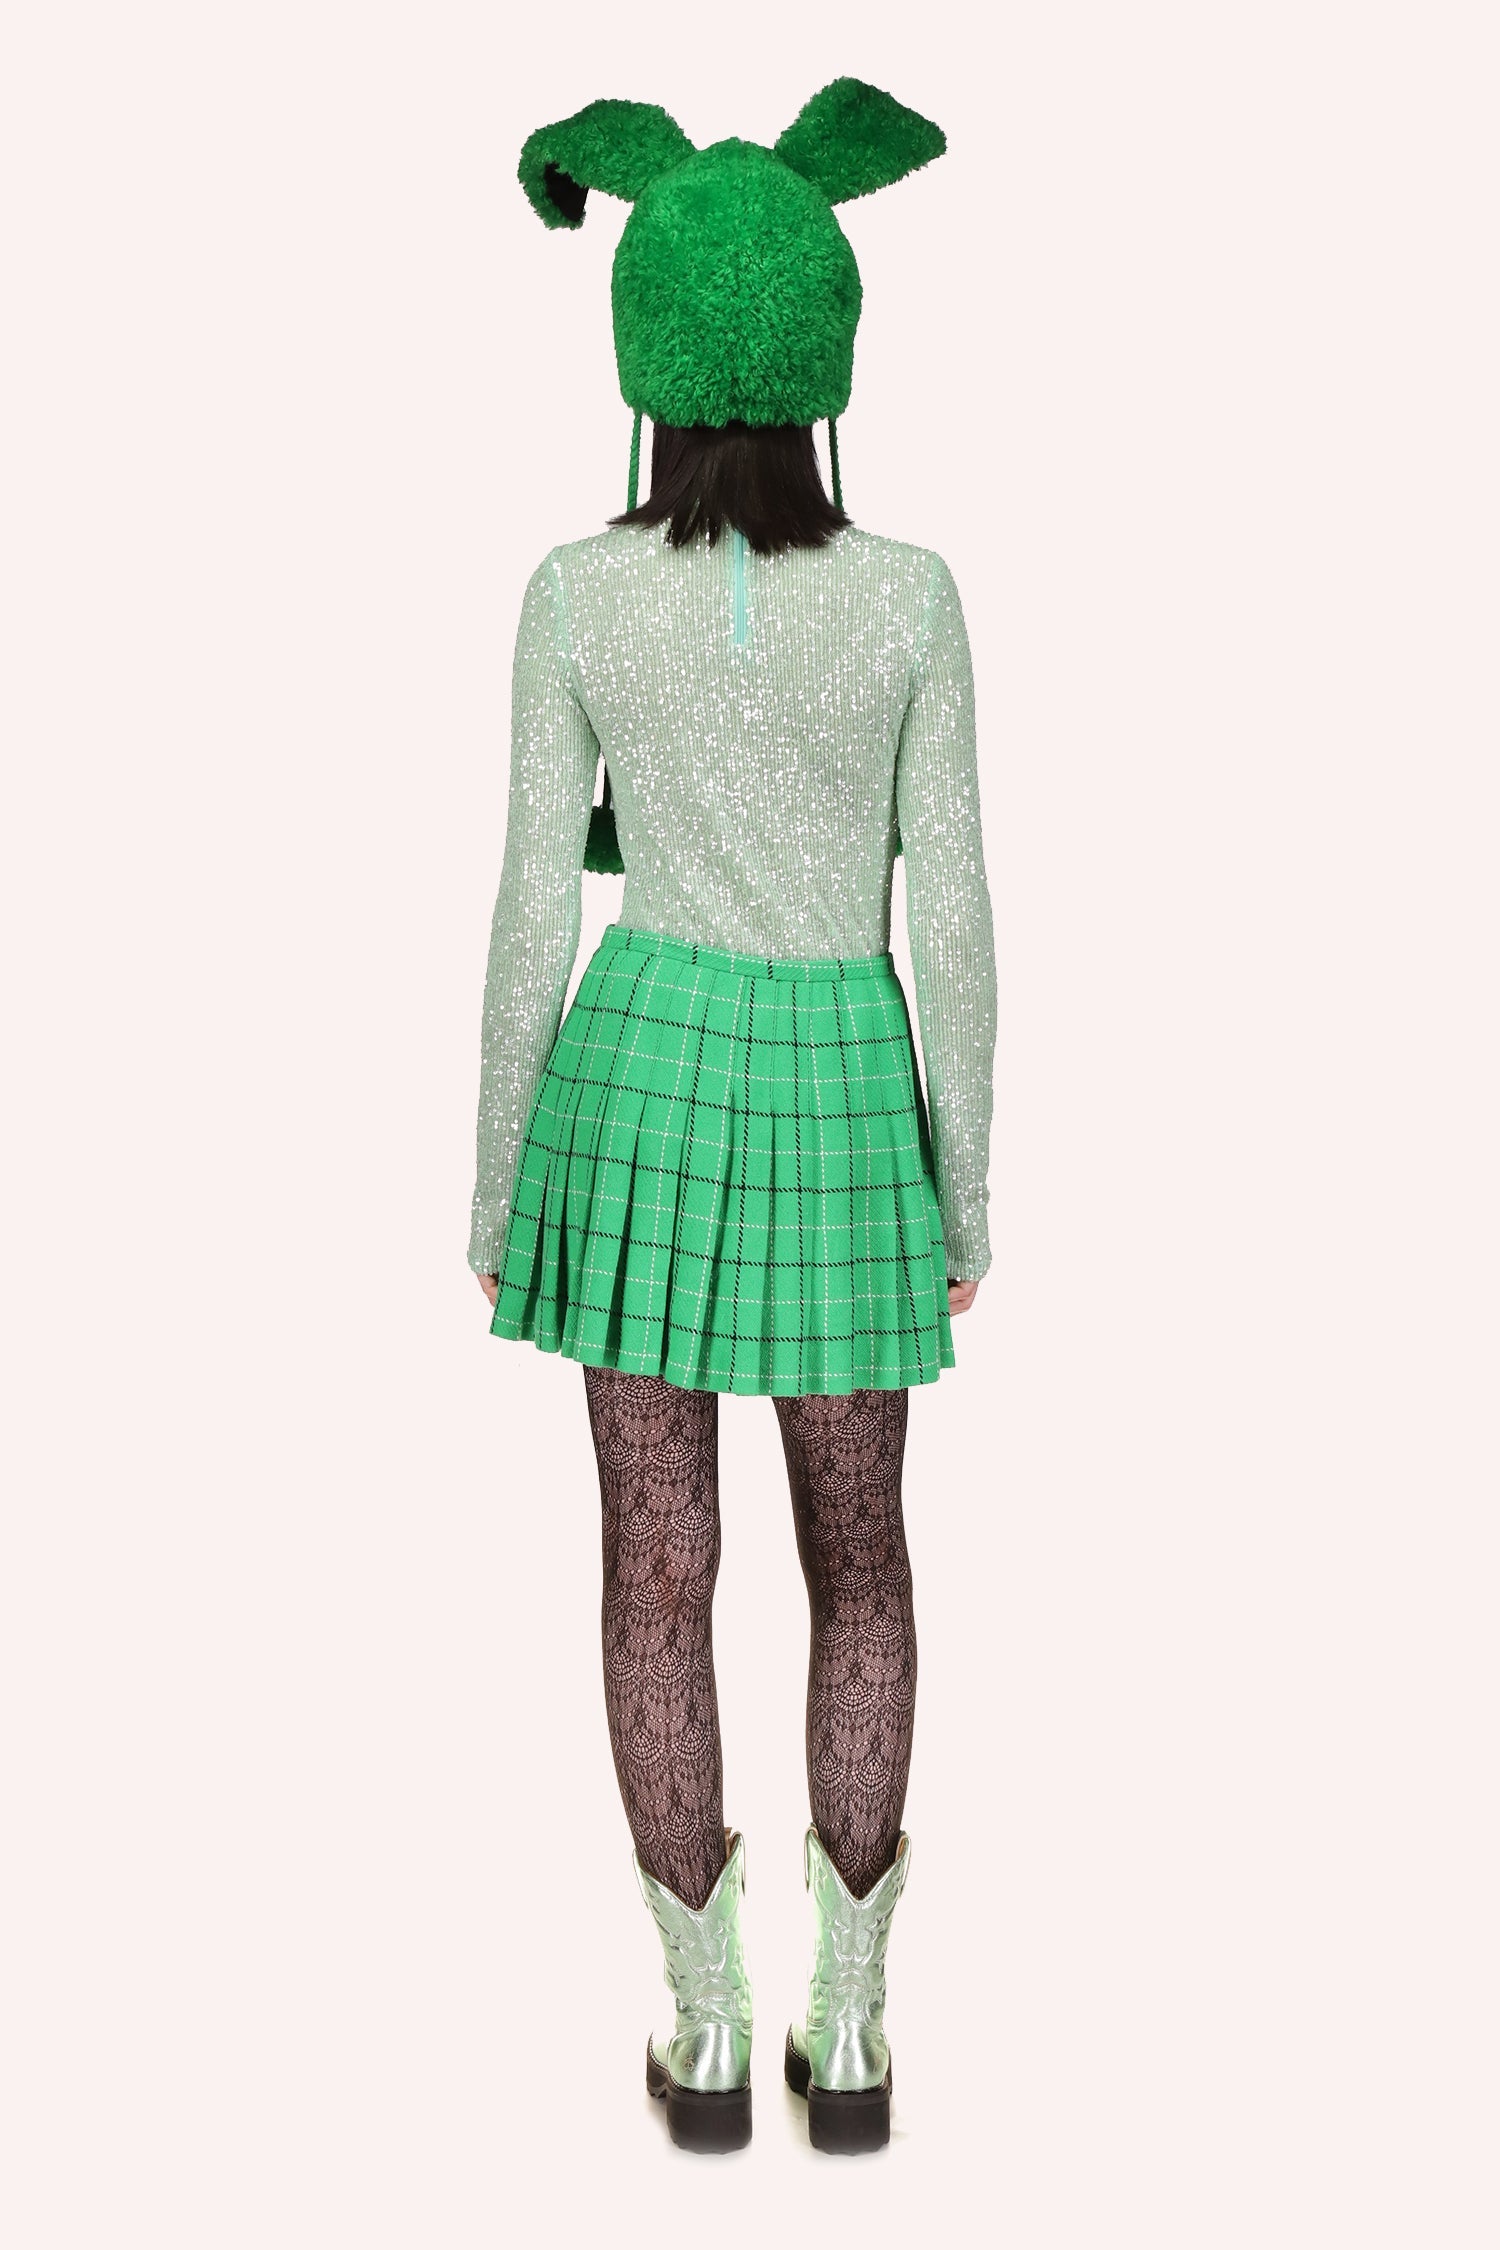 Pleated Skirt Clover, mini skirt, with pattern of dark green and white borders in square shape